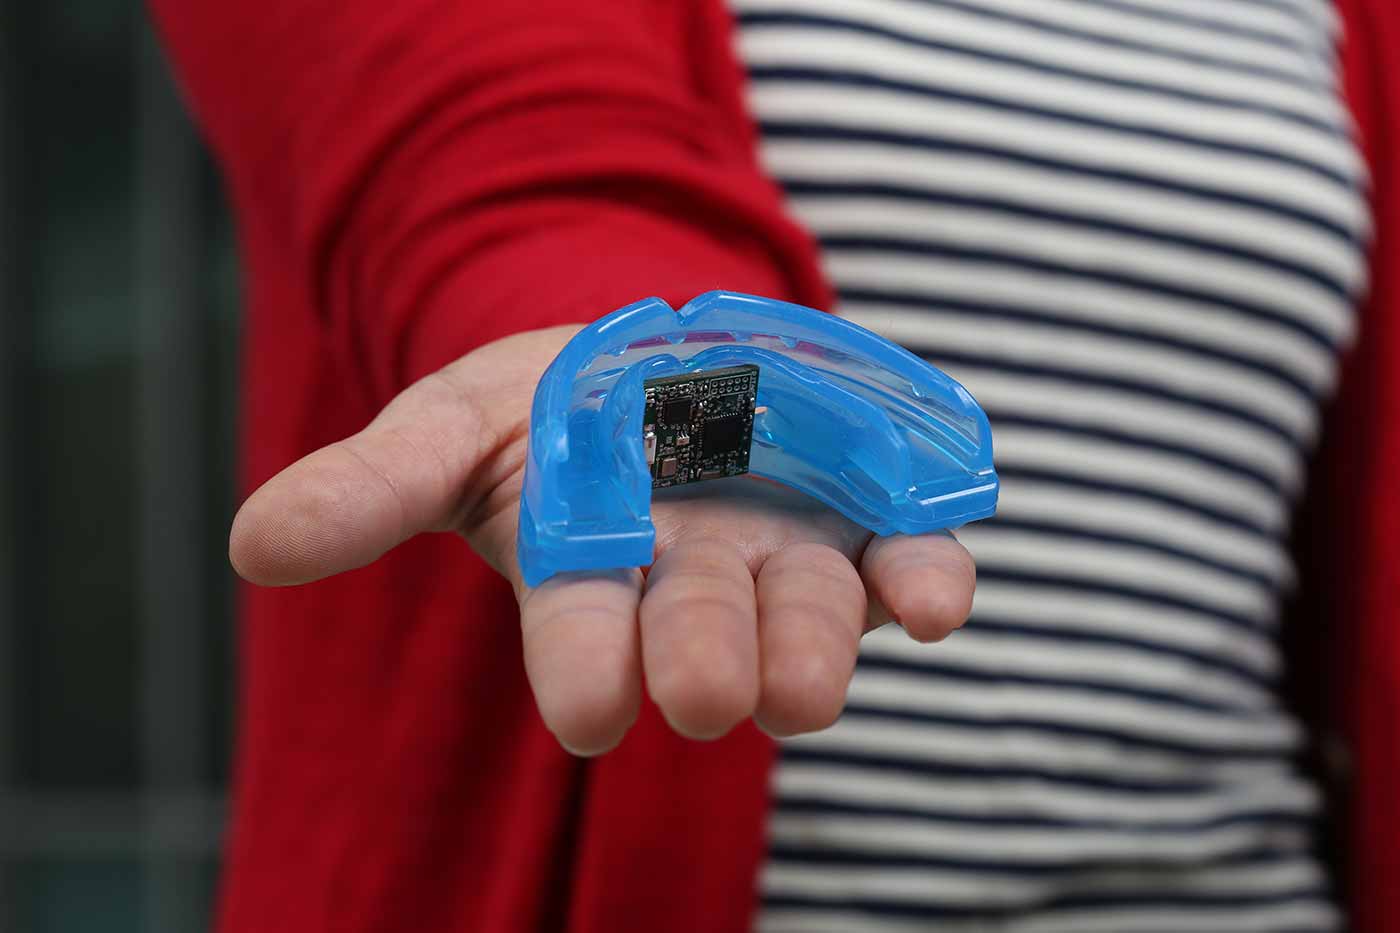 Image: The mouth guard sensor offers an easy and reliable way to monitor uric acid levels in human saliva